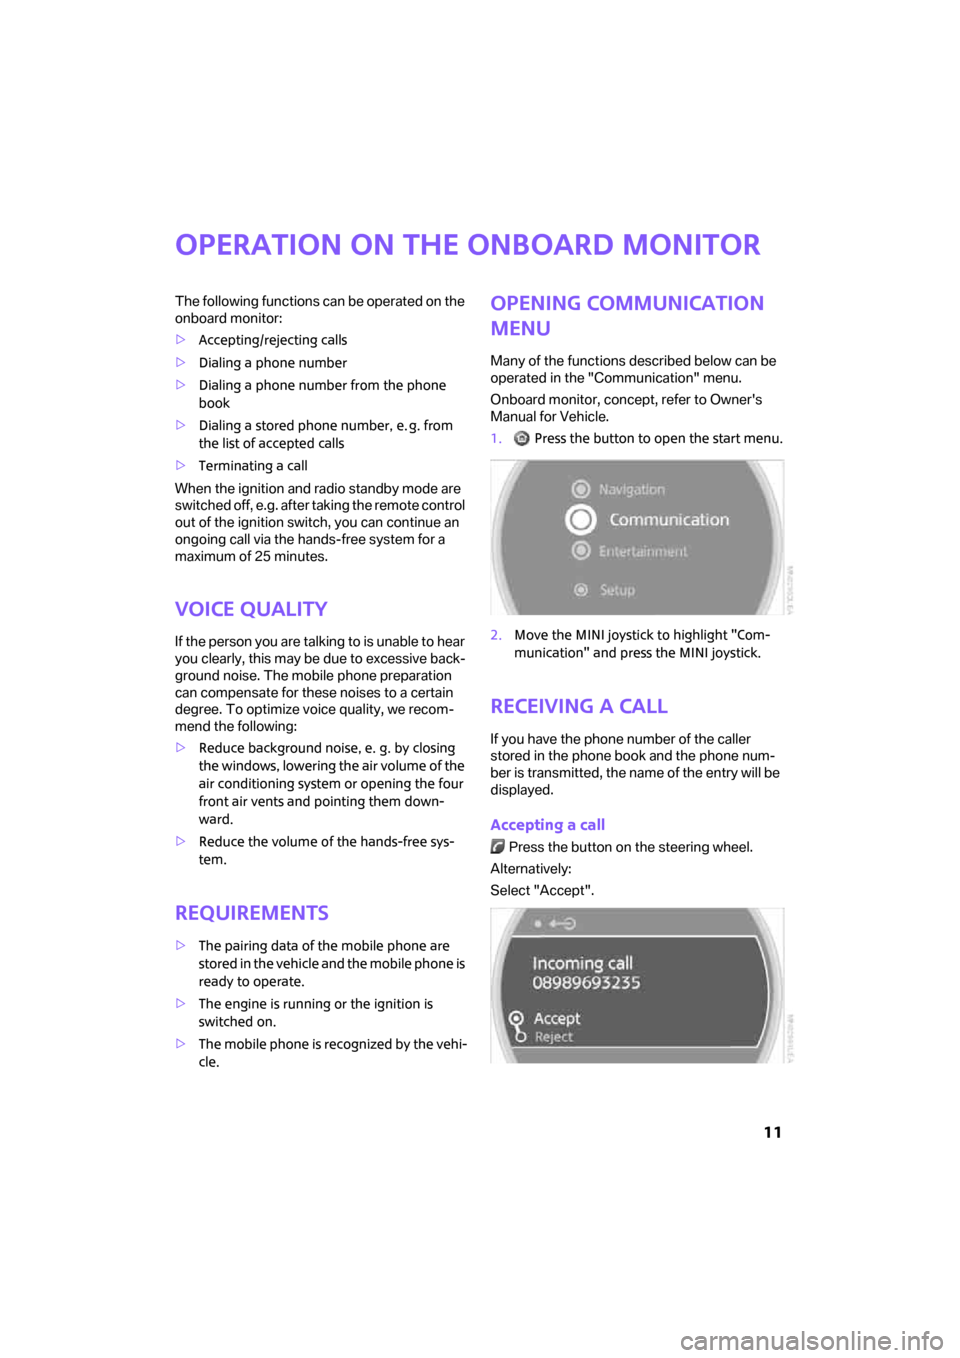 MINI Clubman 2008  Owners Manual (Mini Connected)  11
Operation on the onboard monitor
The following functions can be operated on the 
onboard monitor:
>Accepting/rejecting calls
>Dialing a phone number
>Dialing a phone number from the phone 
book
>D